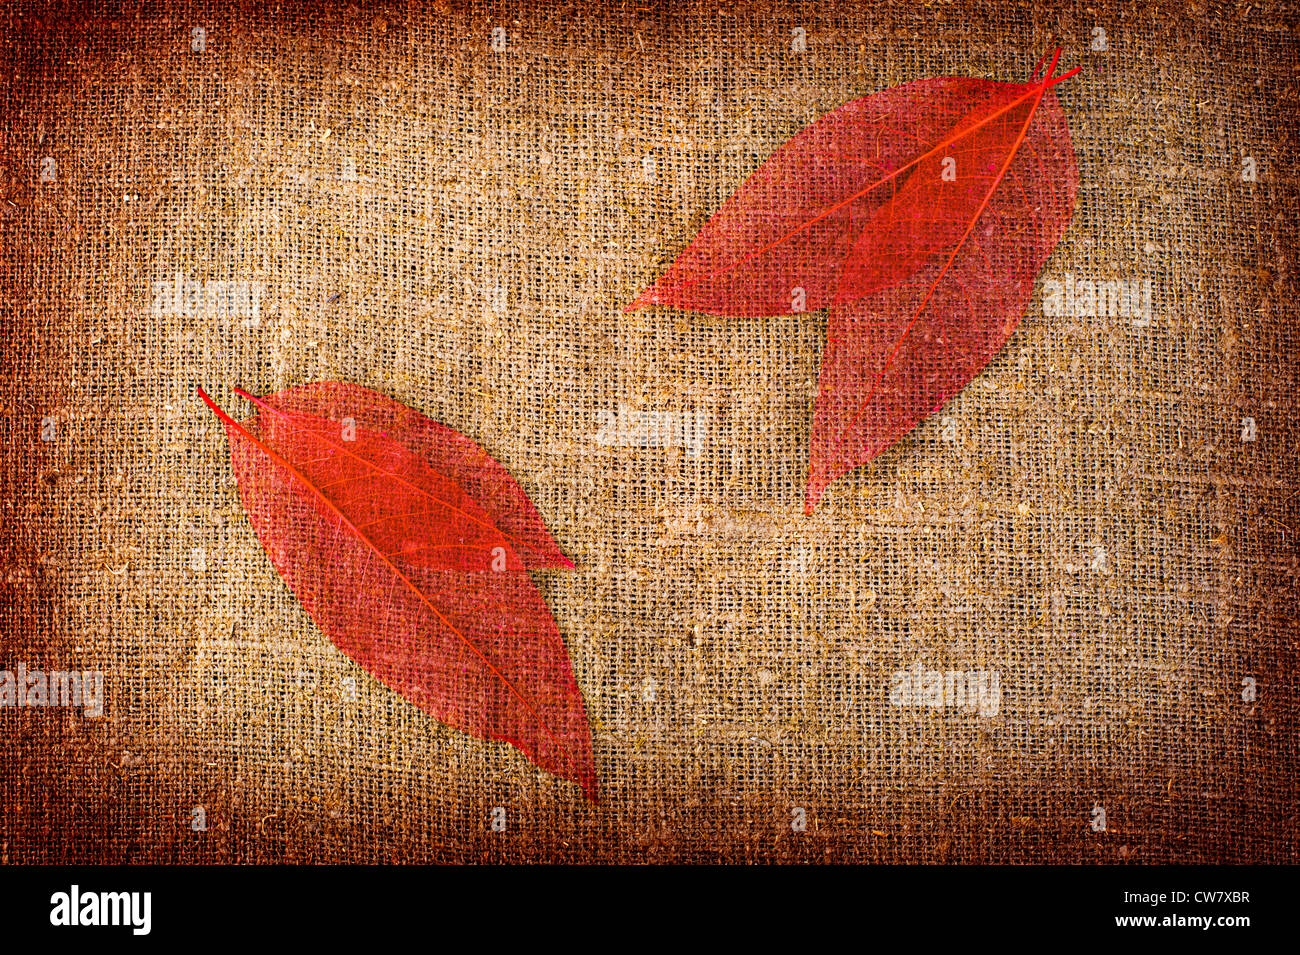 Grunge autumn background with dried leaves isolated on canvas Stock Photo